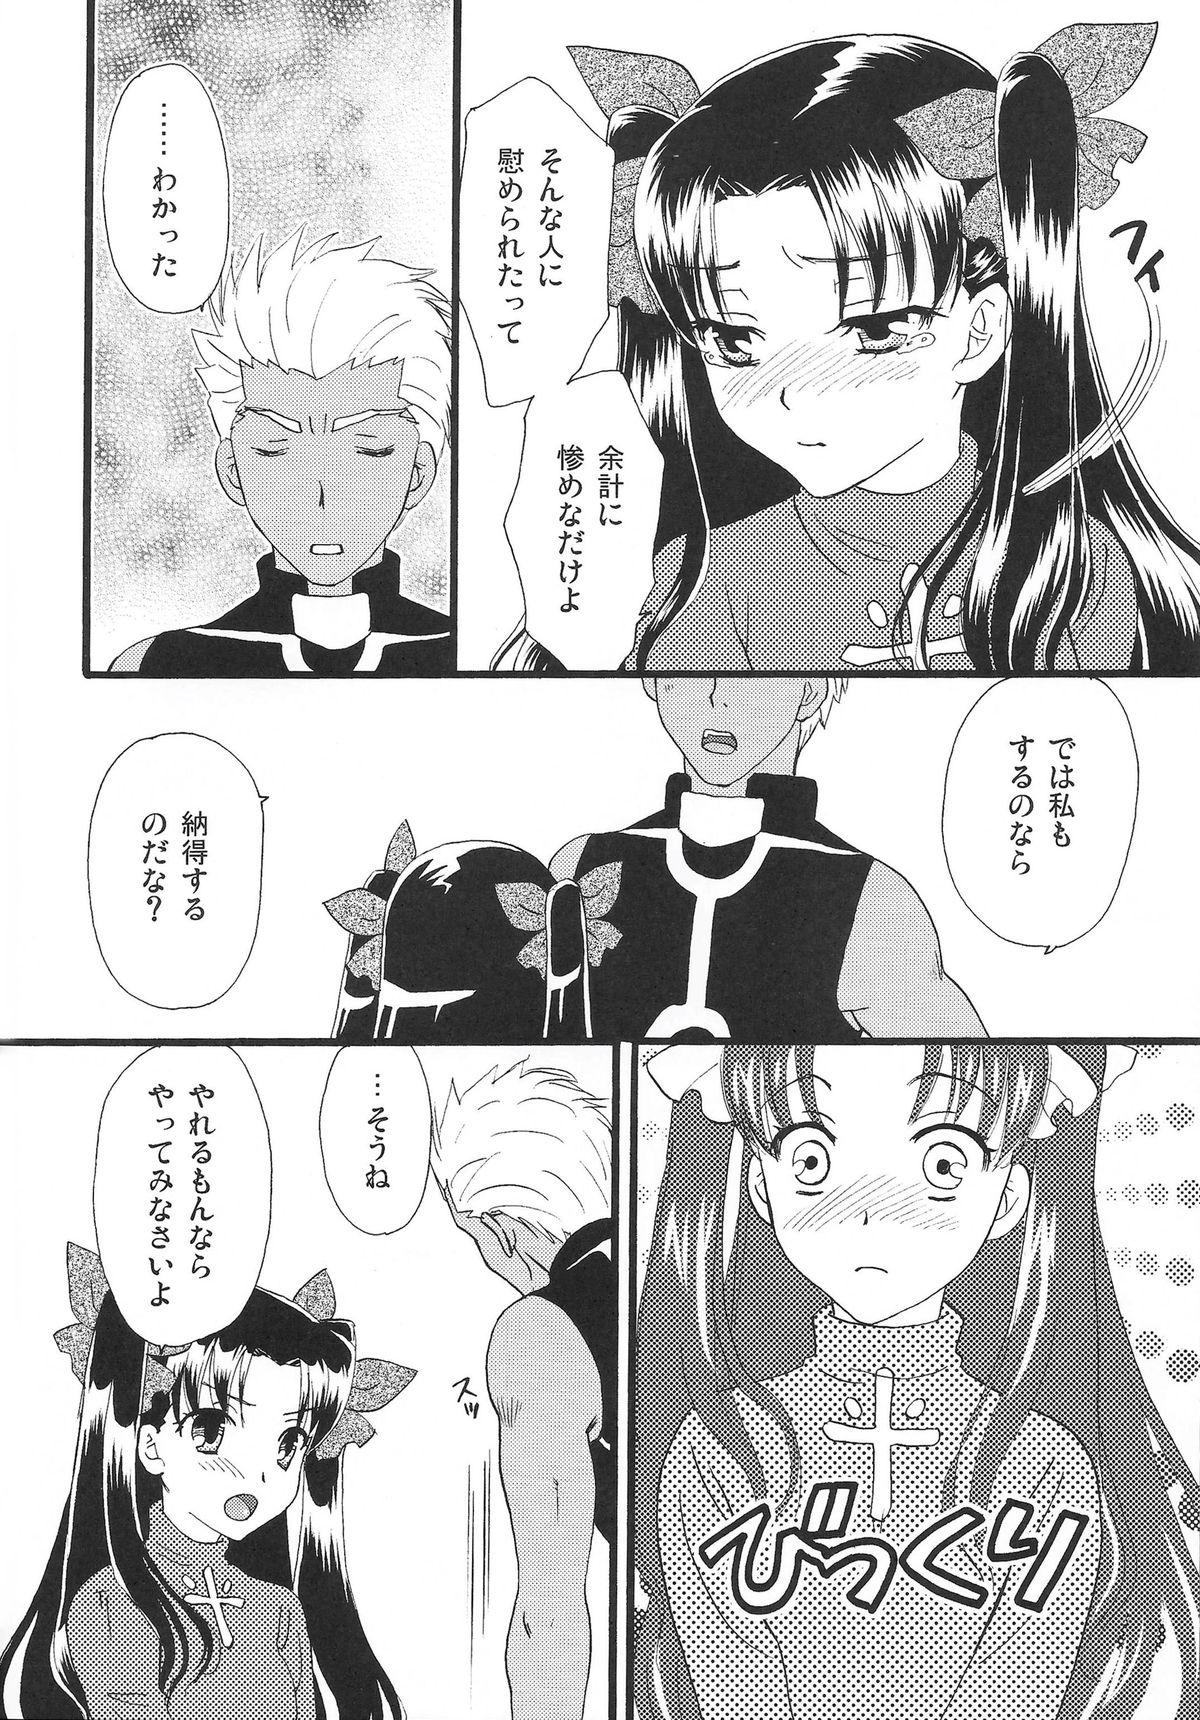 Grosso Good-chu!×2 - Fate stay night Oil - Page 11